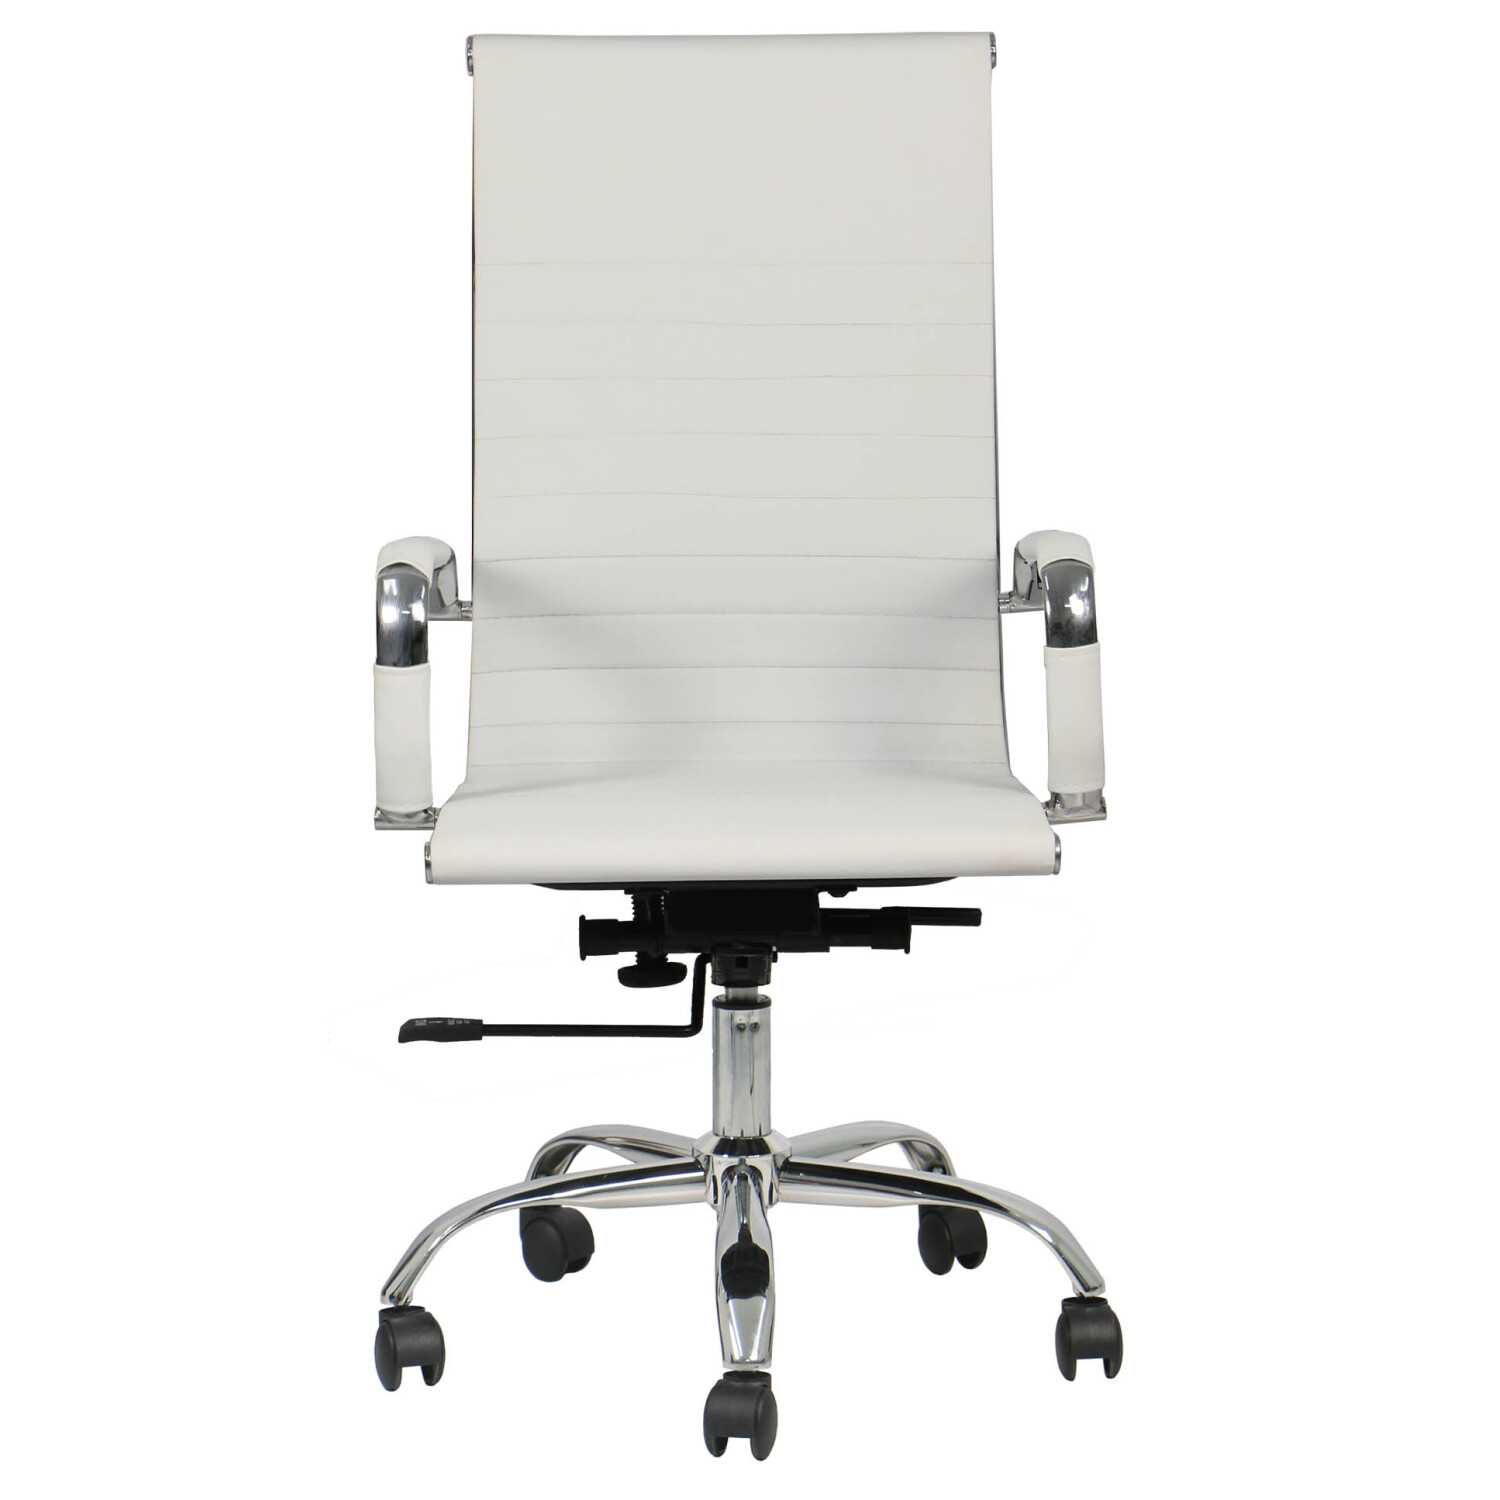 Home Office Designer Epsom  ribbed office chair White High Back Gokd arms and base 